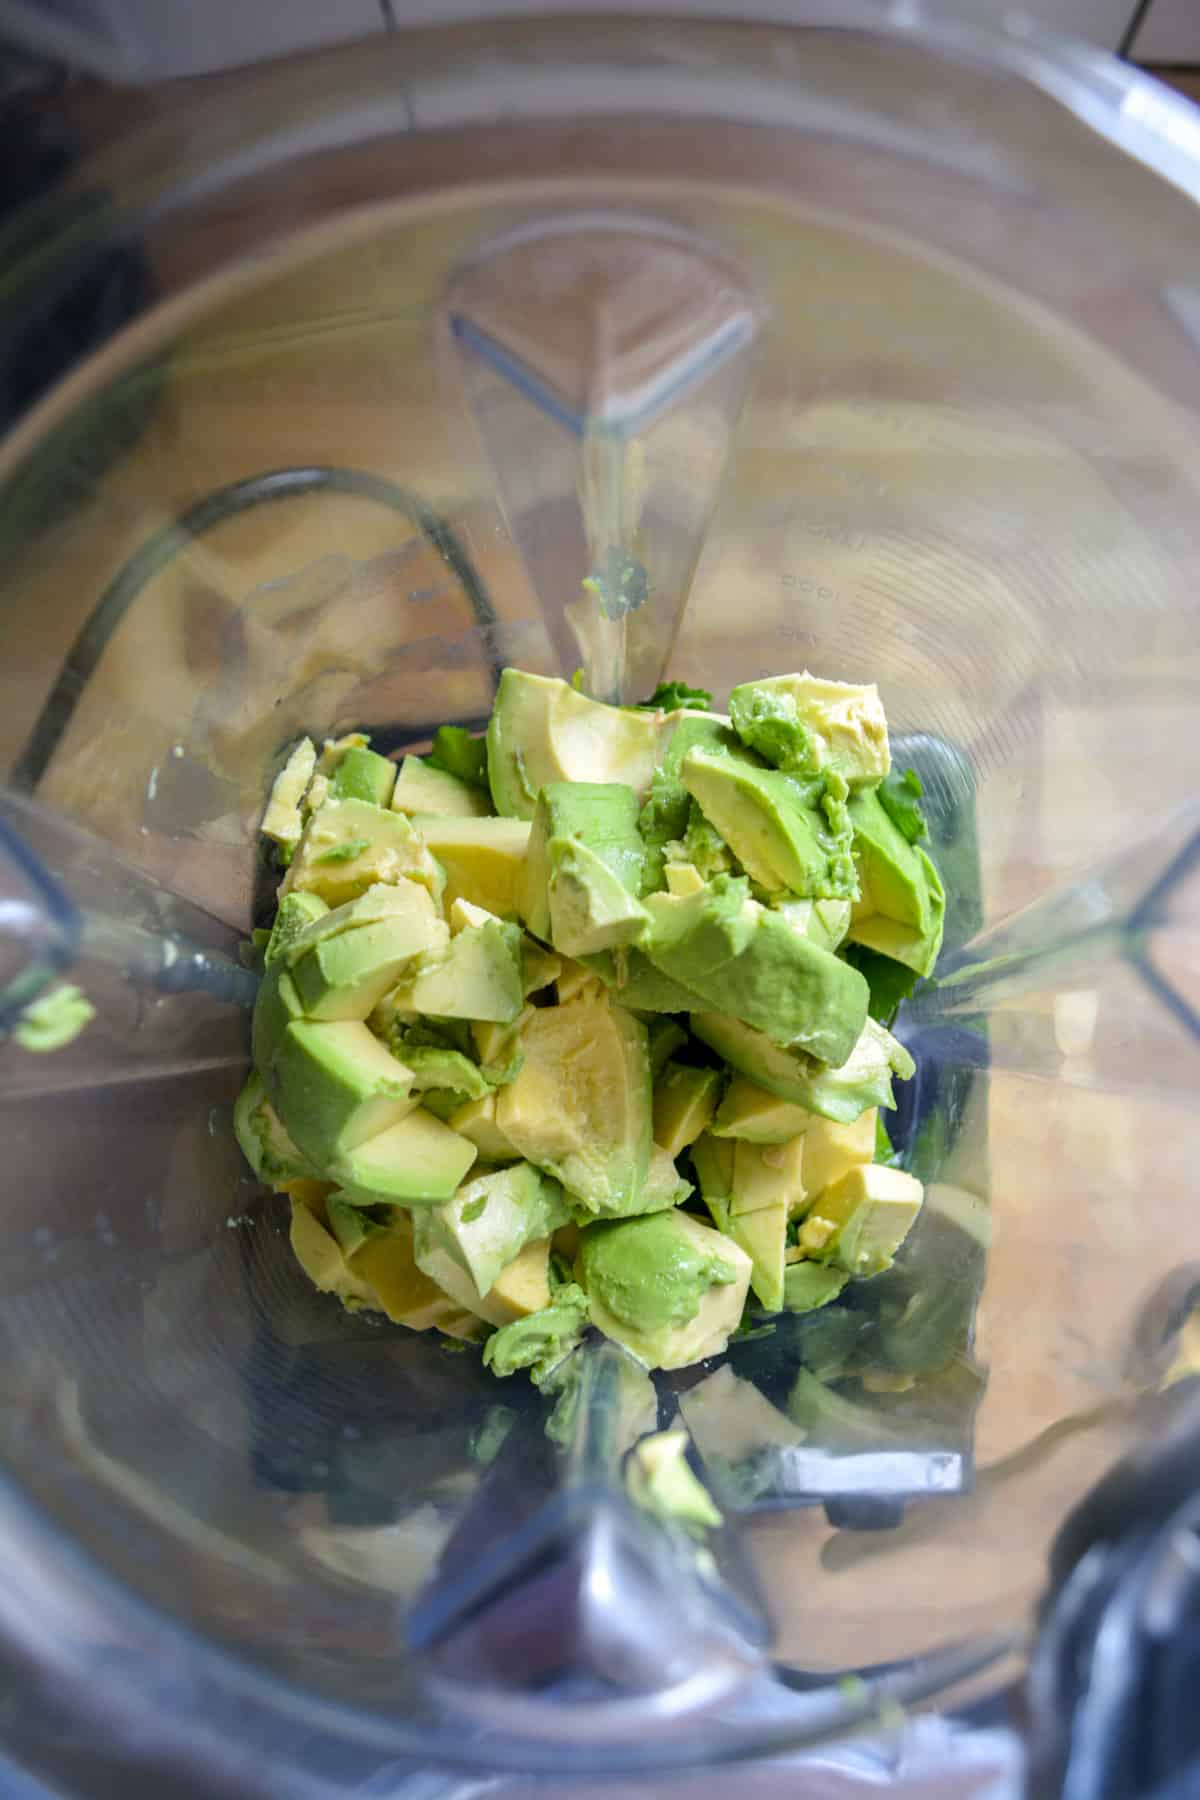 Ingredients for making avocado crema in a blender.